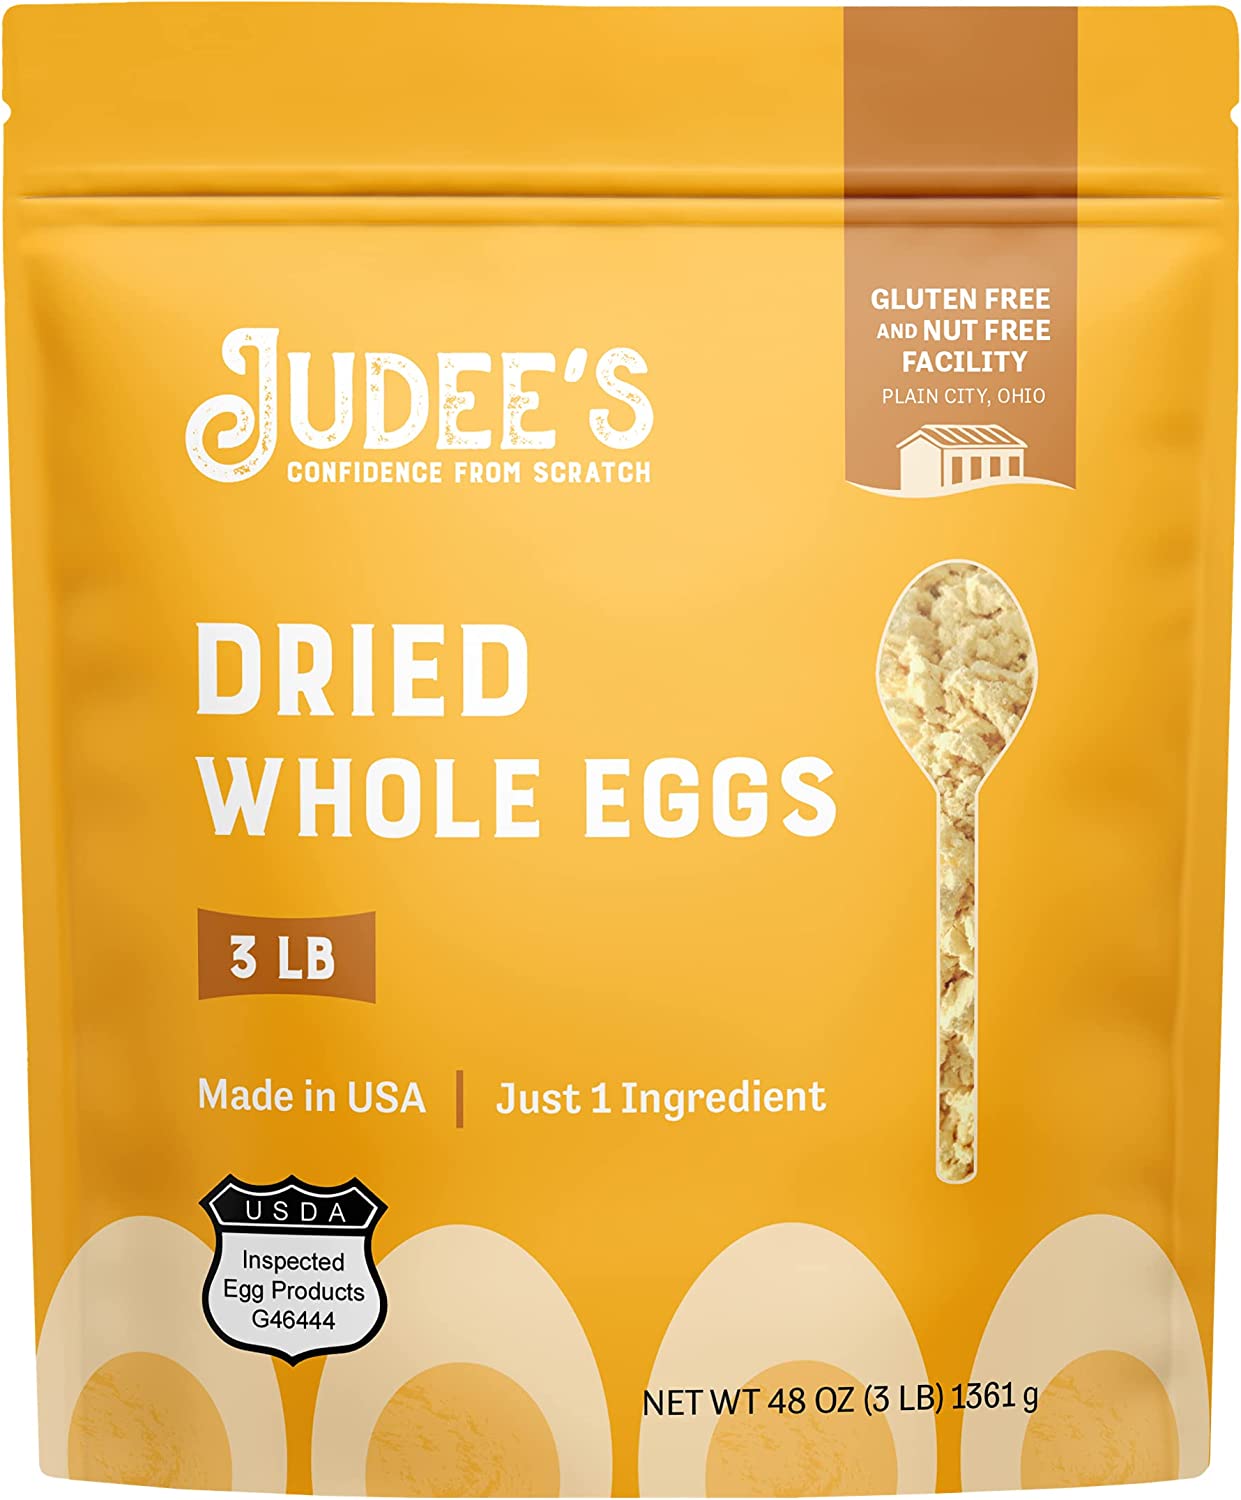 Judee’s Whole Egg Powder 3 lb – No Additives, Just One Ingredient, Pasteurized – 100% Non-GMO – Gluten-Free and Nut-Free – Great for Camping and Baking – Quick and Easy for Outdoor Preparations